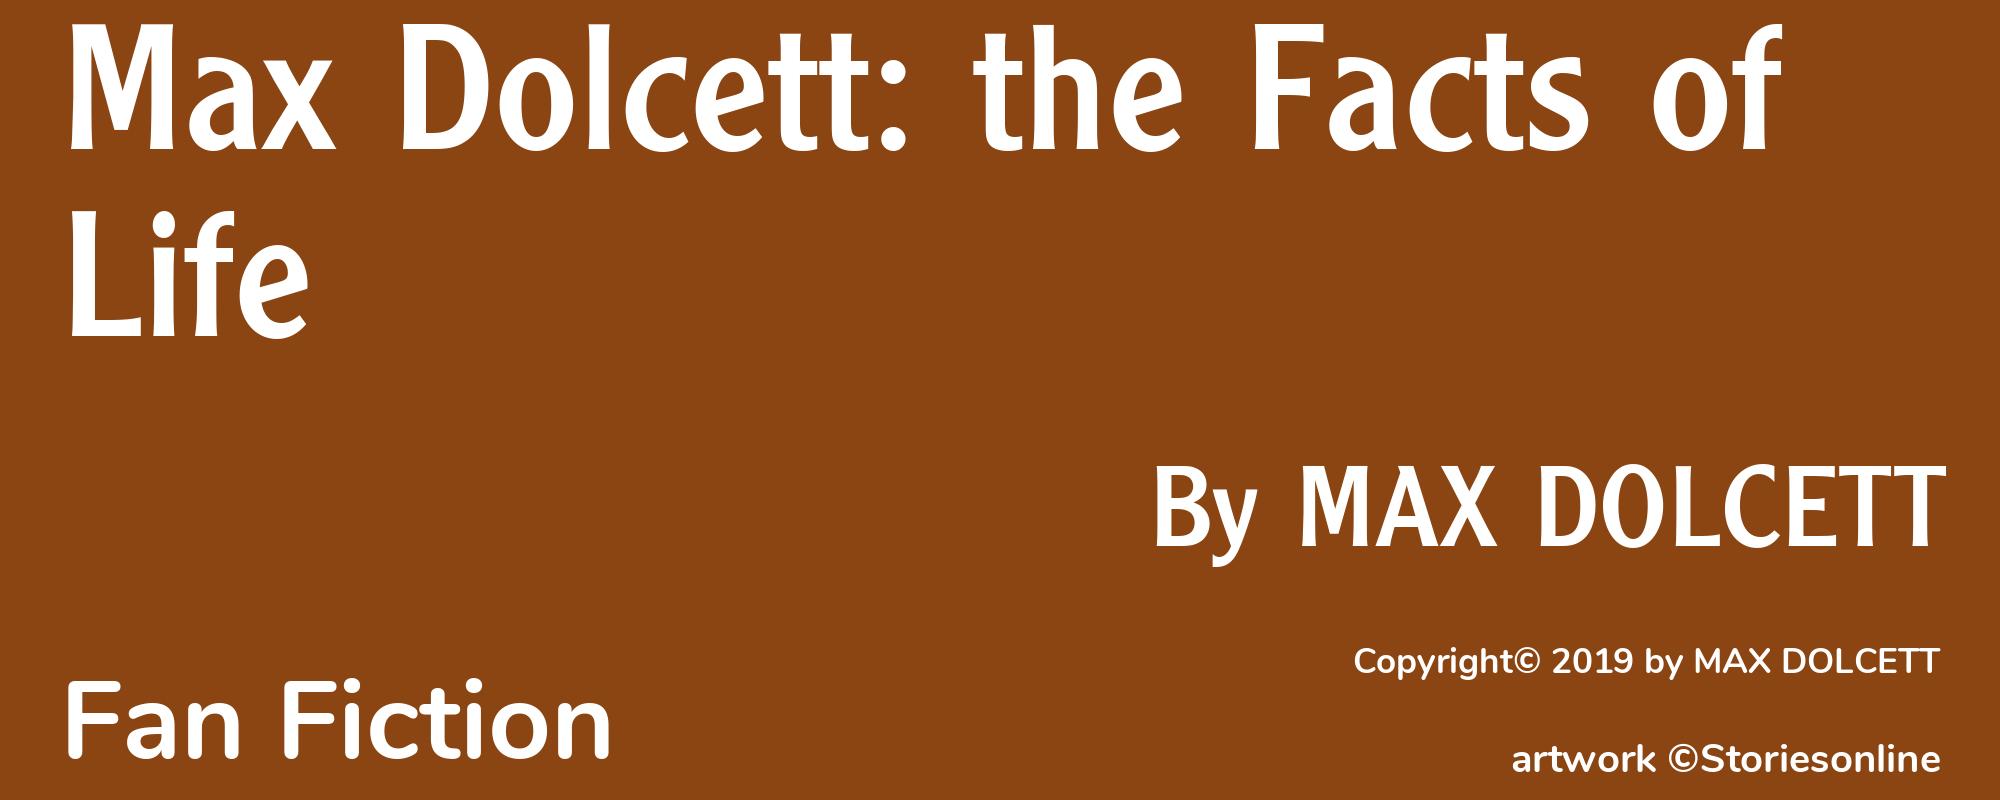 Max Dolcett: the Facts of Life - Cover